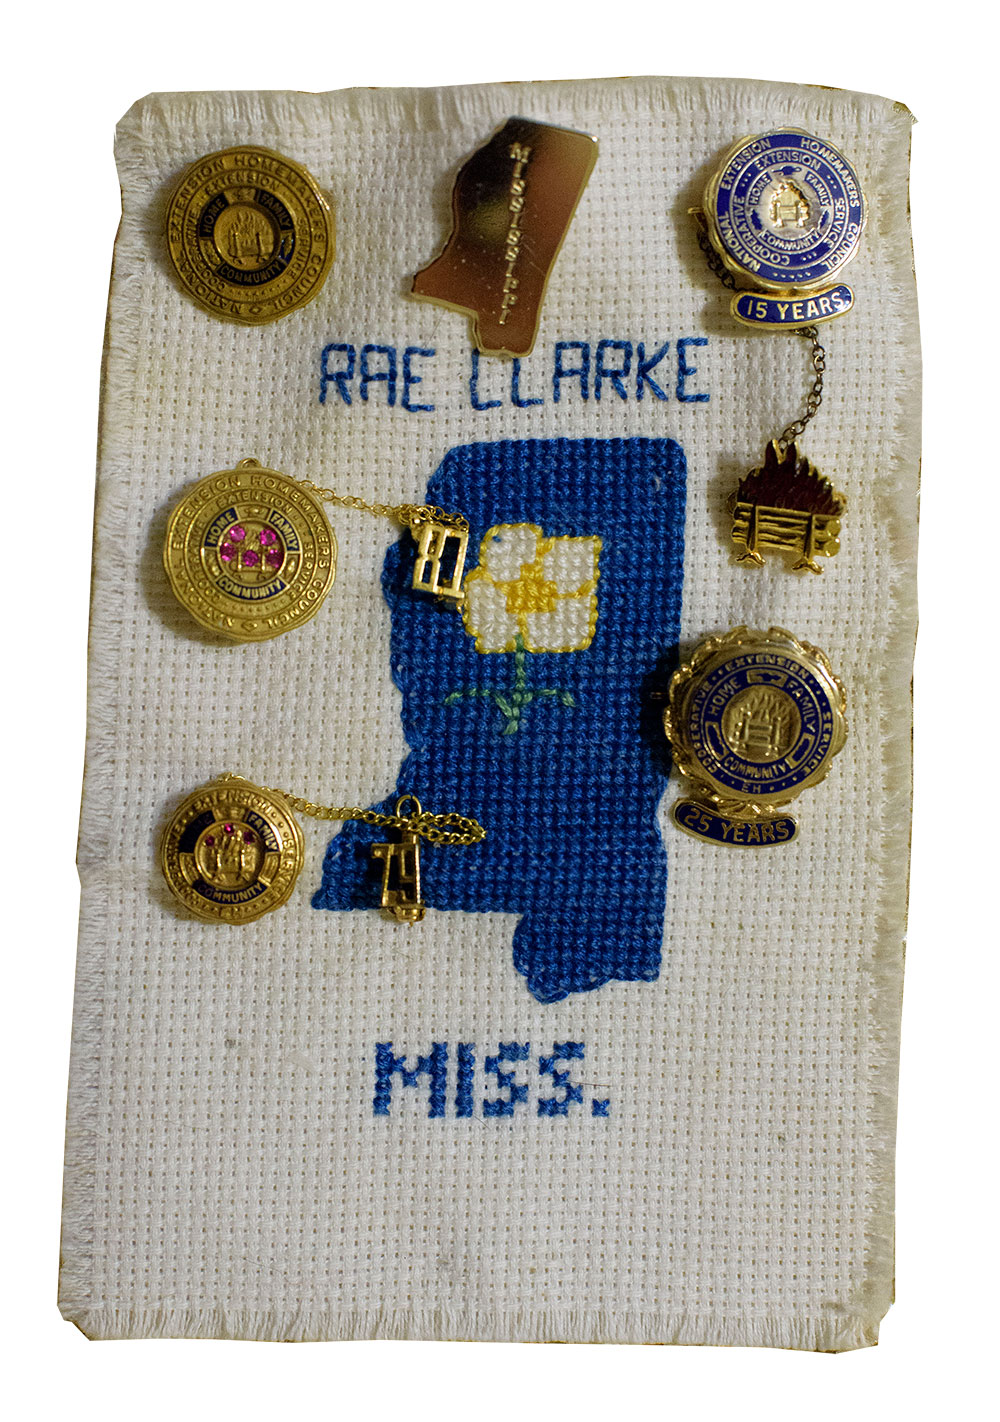 A rectangular piece of white fabric has a blue outline of the state of Mississippi and the words "Rae Clarke" and "Miss." The fabric is decorated with several gold pins.